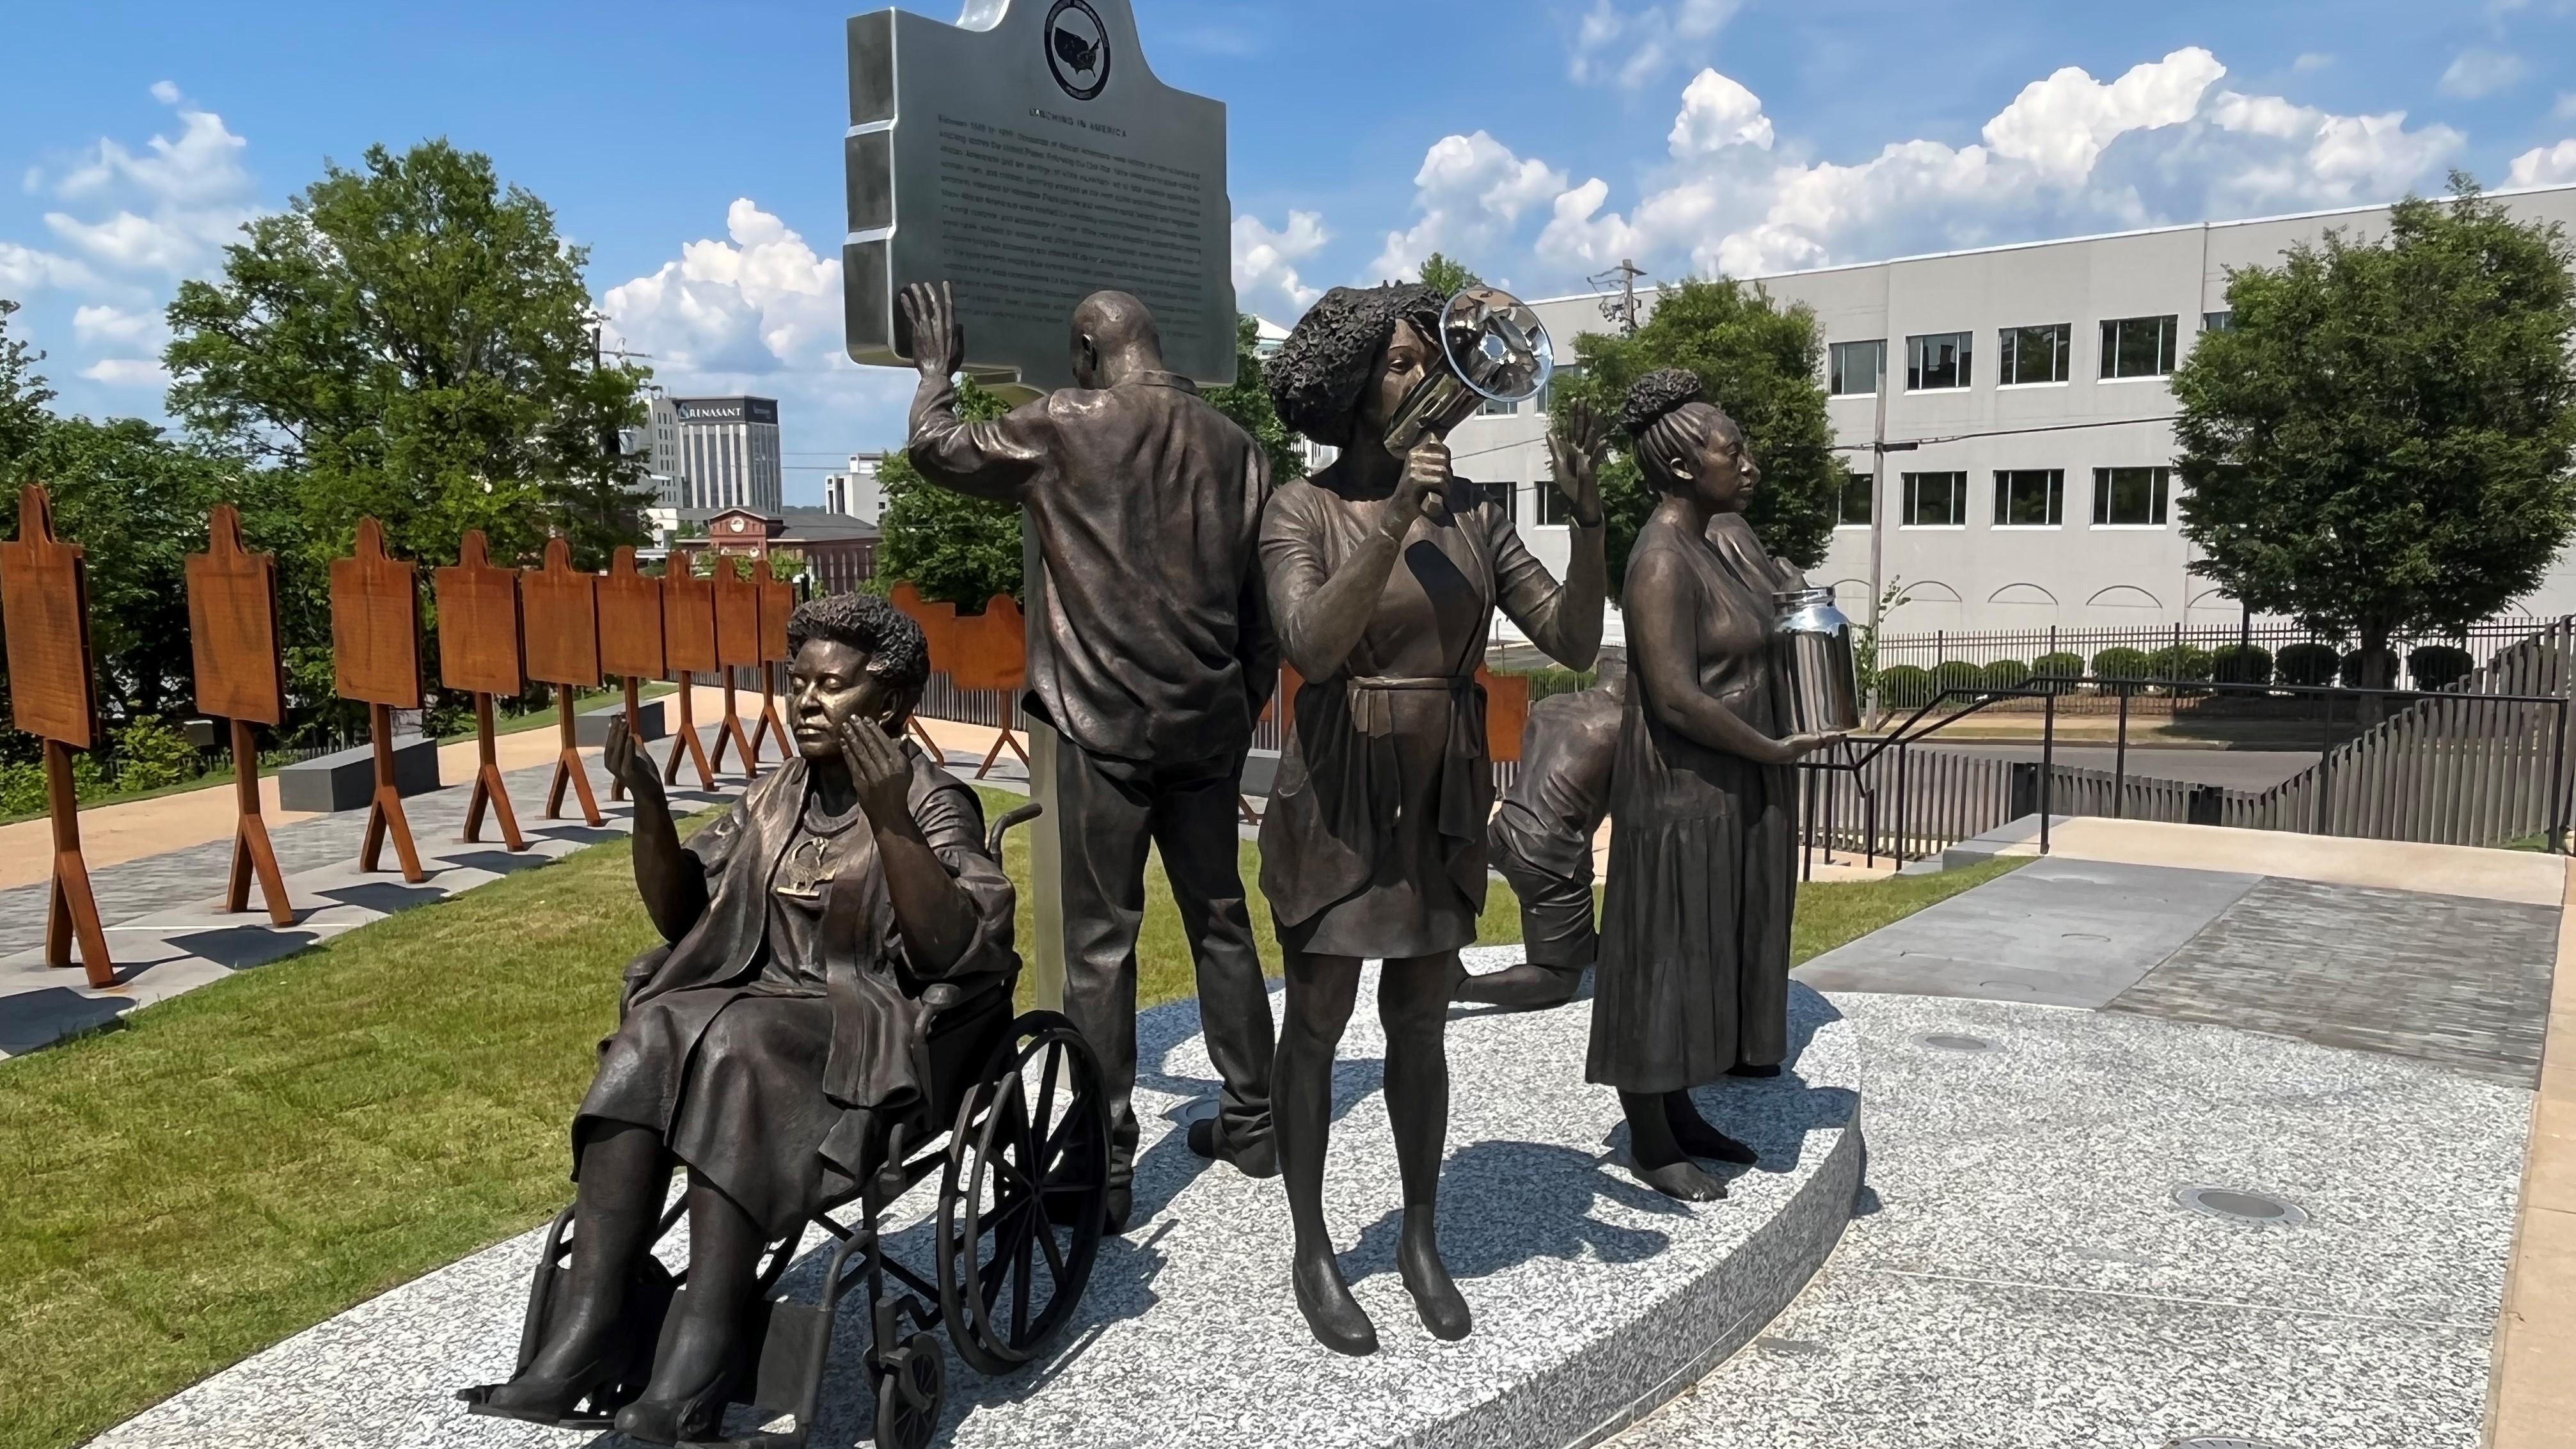 Learning the Past, Changing Our Future: Women’s Civil Rights Mission to the American South